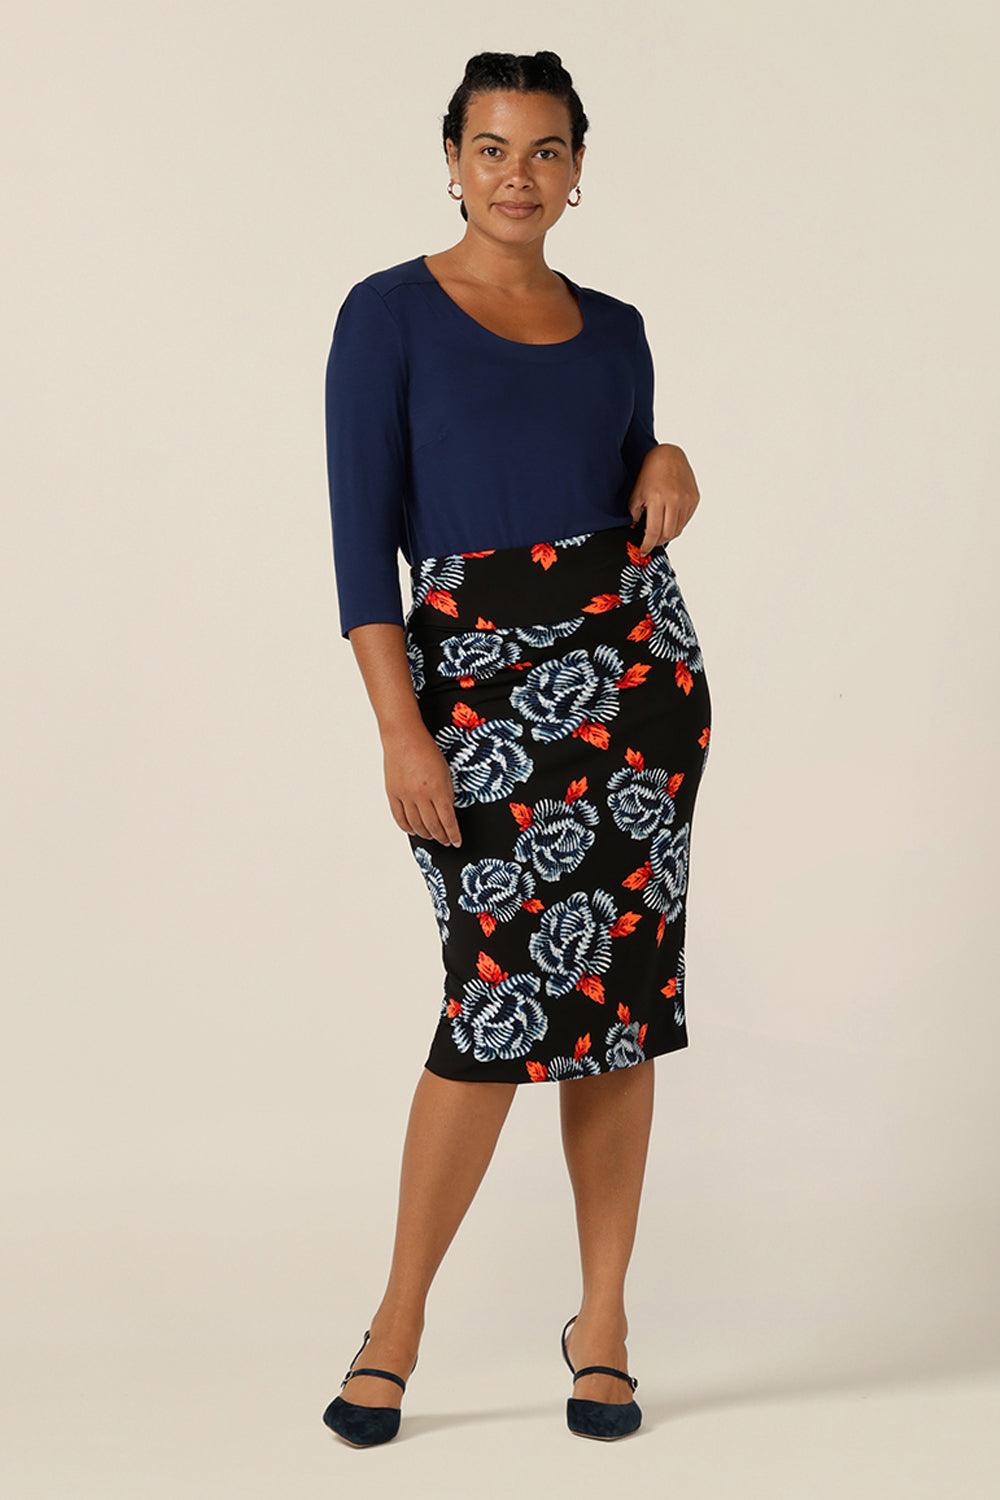 A great skirt for work and corporate wear, the Andi Skirt in Ikebana is a tube skirt in stretch jersey fabric. Australian-made by Australia and New Zealand women's clothing brand, L&F, this black skirt has a blue and orange floral pattern. This modern print skirt is worn with a 3/4 sleeve, round neck top in navy blue bamboo jersey. Shop this skirt in an inclusive size range of 8-24.